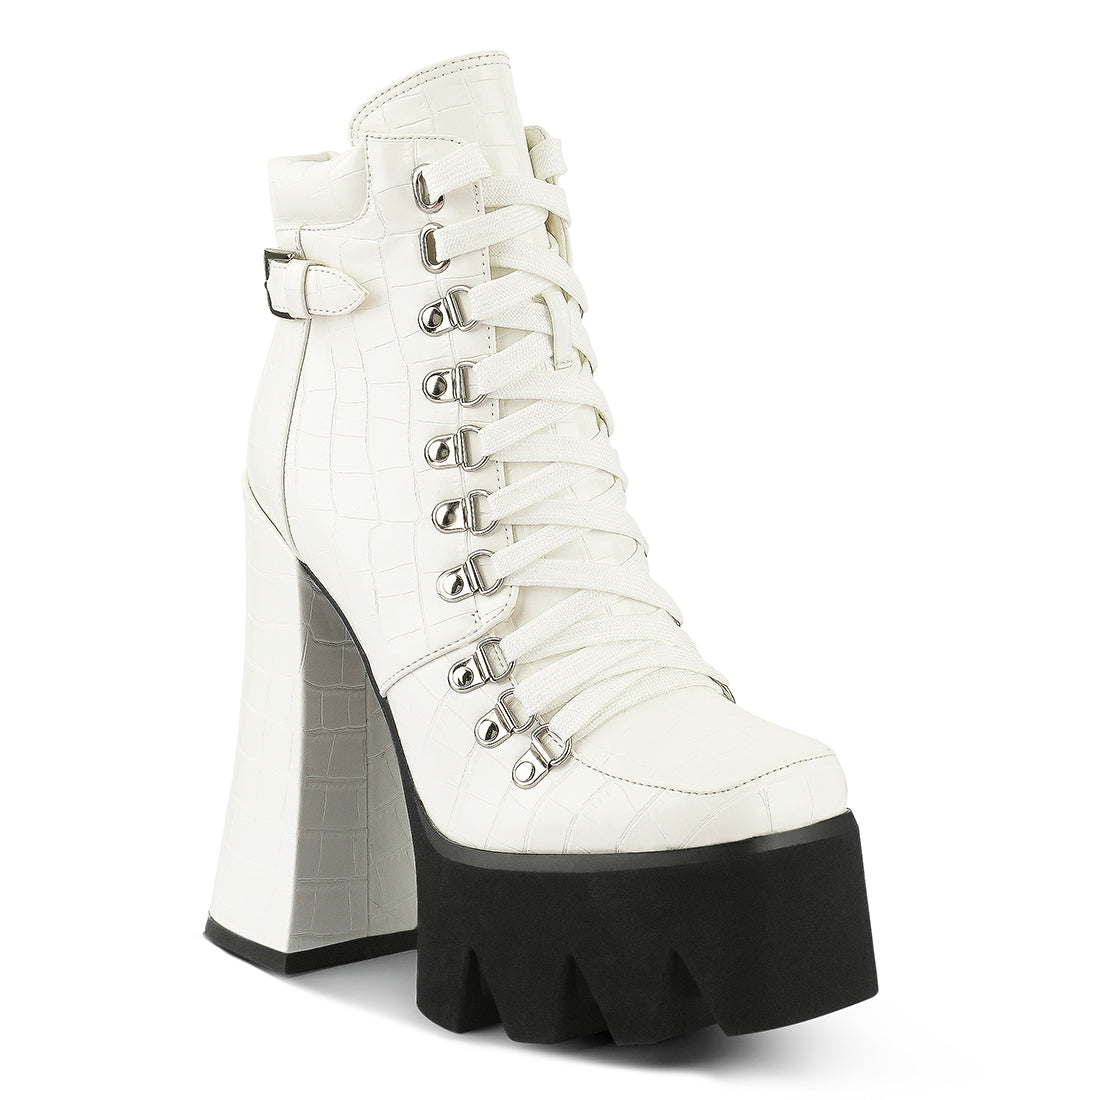 White High Heeled Platform Ankle Boots